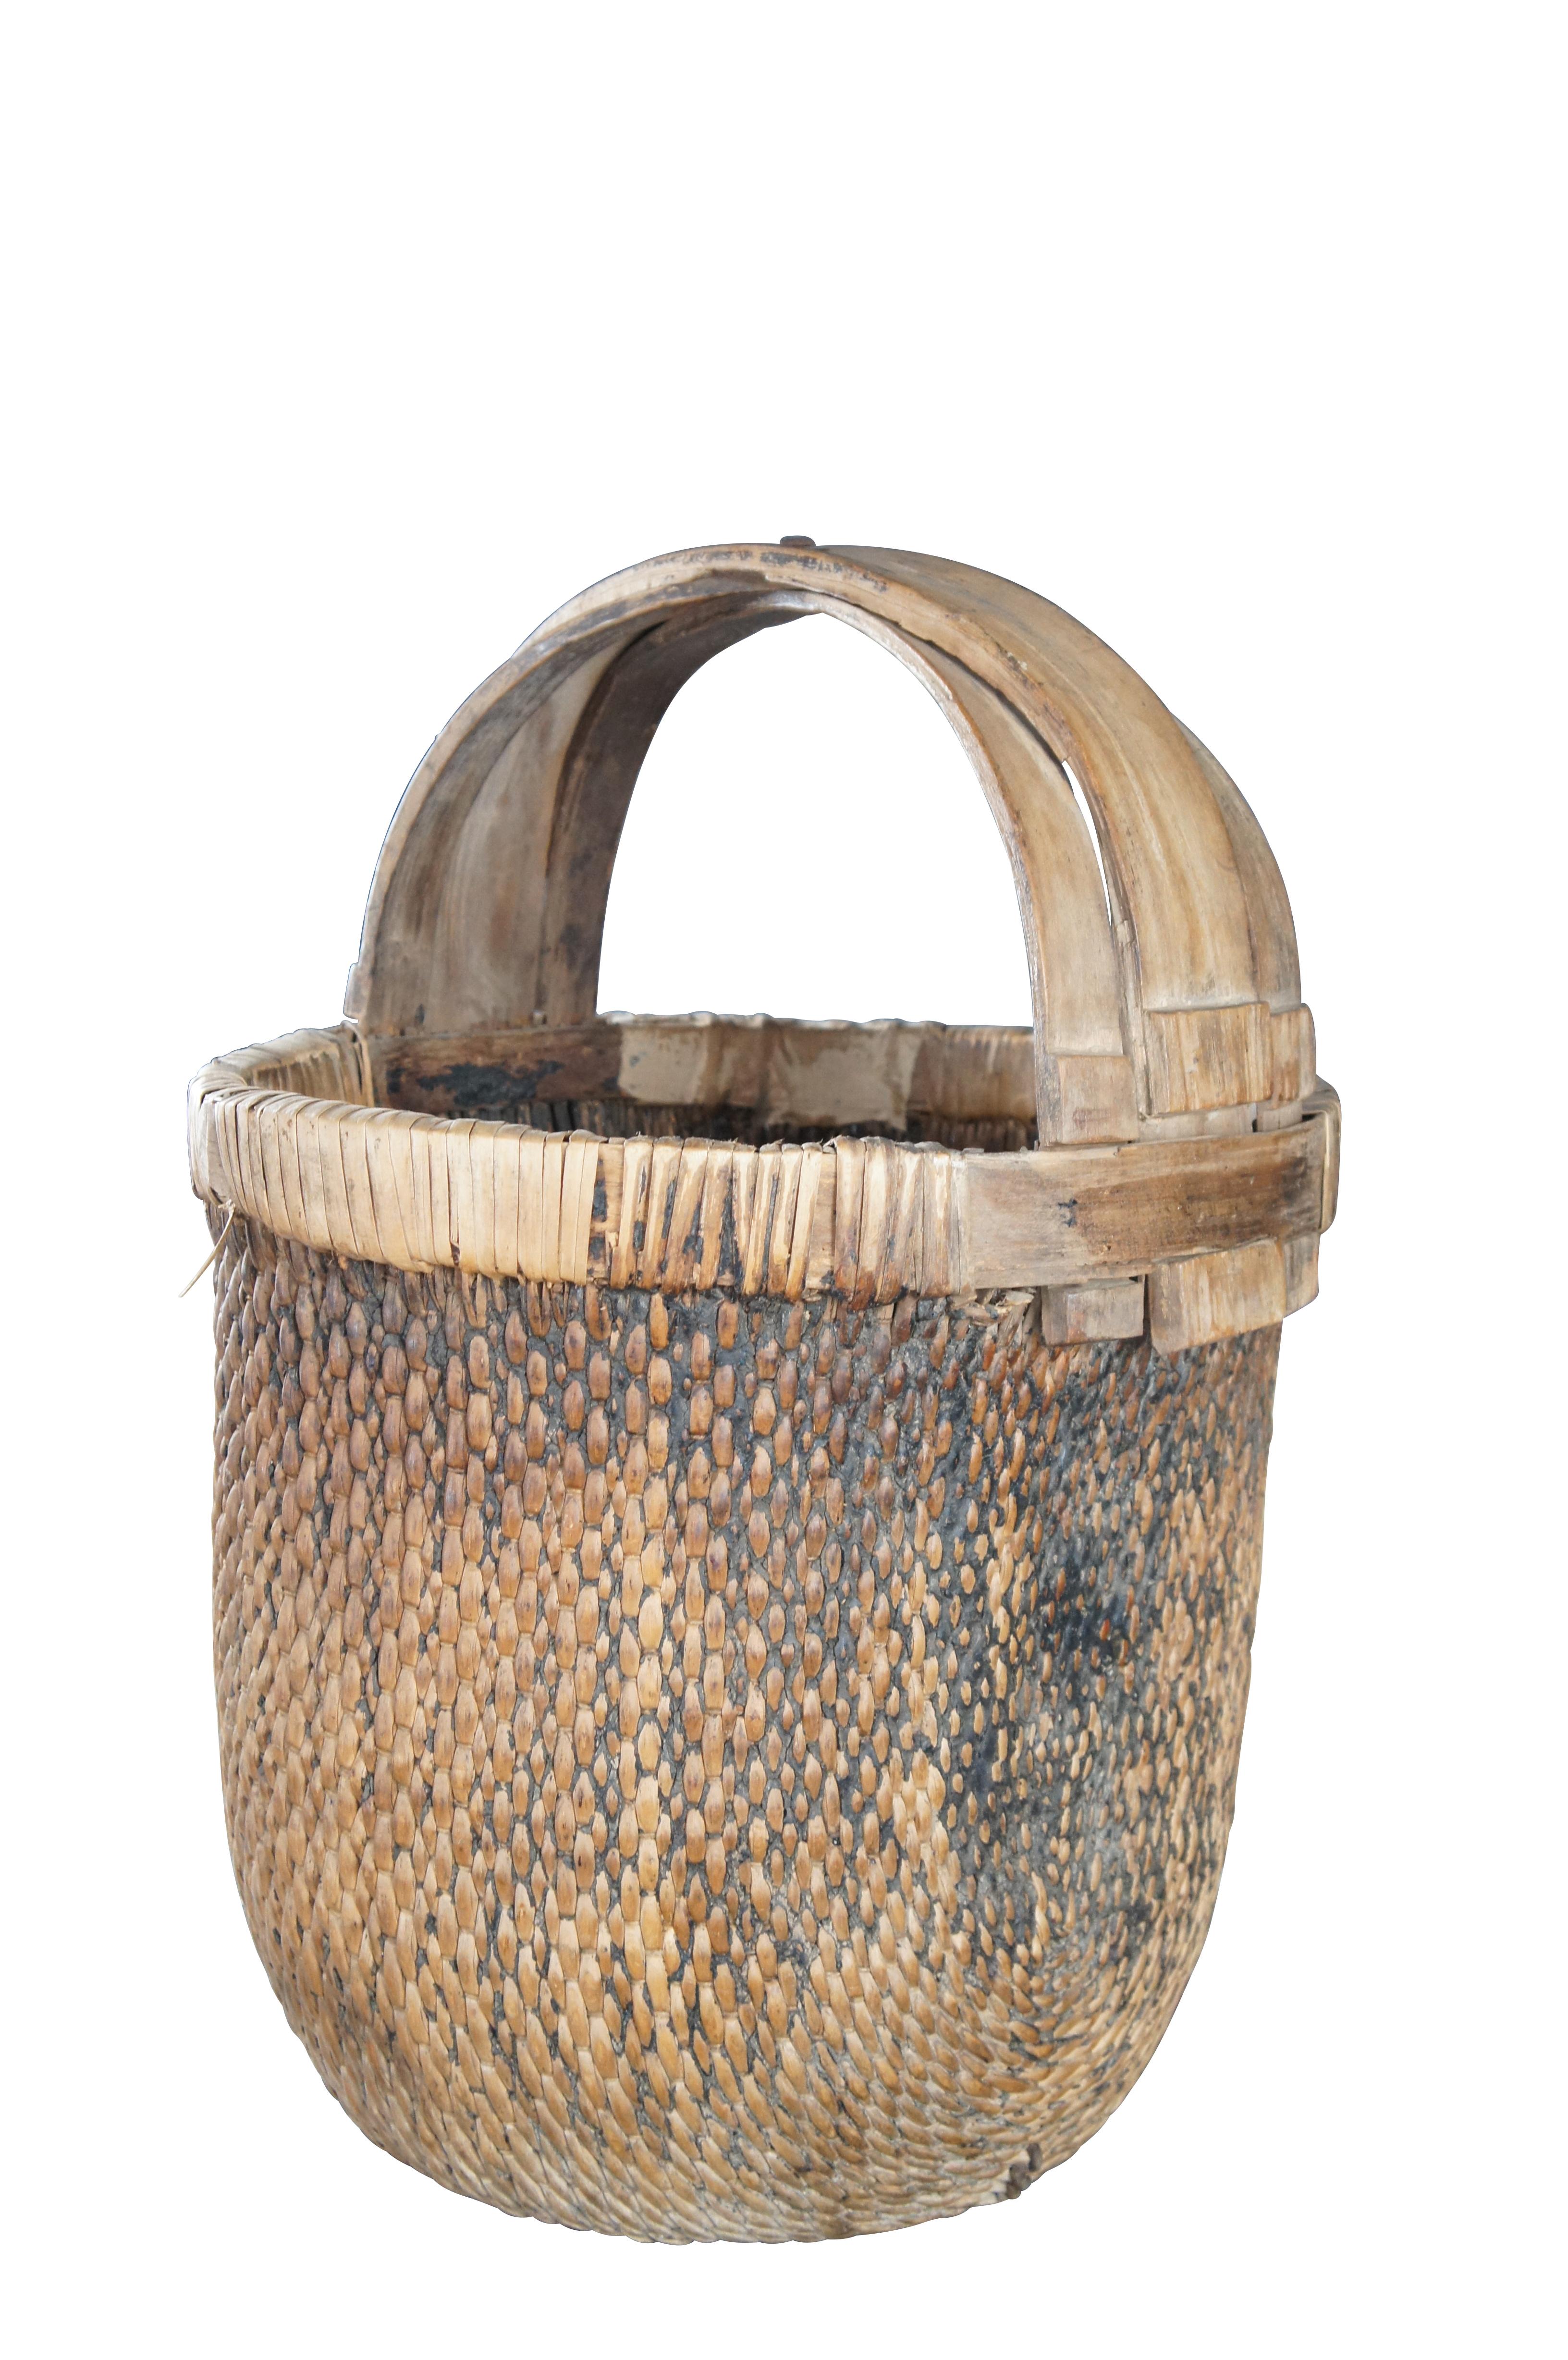 Early 20th Century Chinese Rice Basket. Made from woven reed with a bentwood handle and calligraphy.

Dimensions:
16